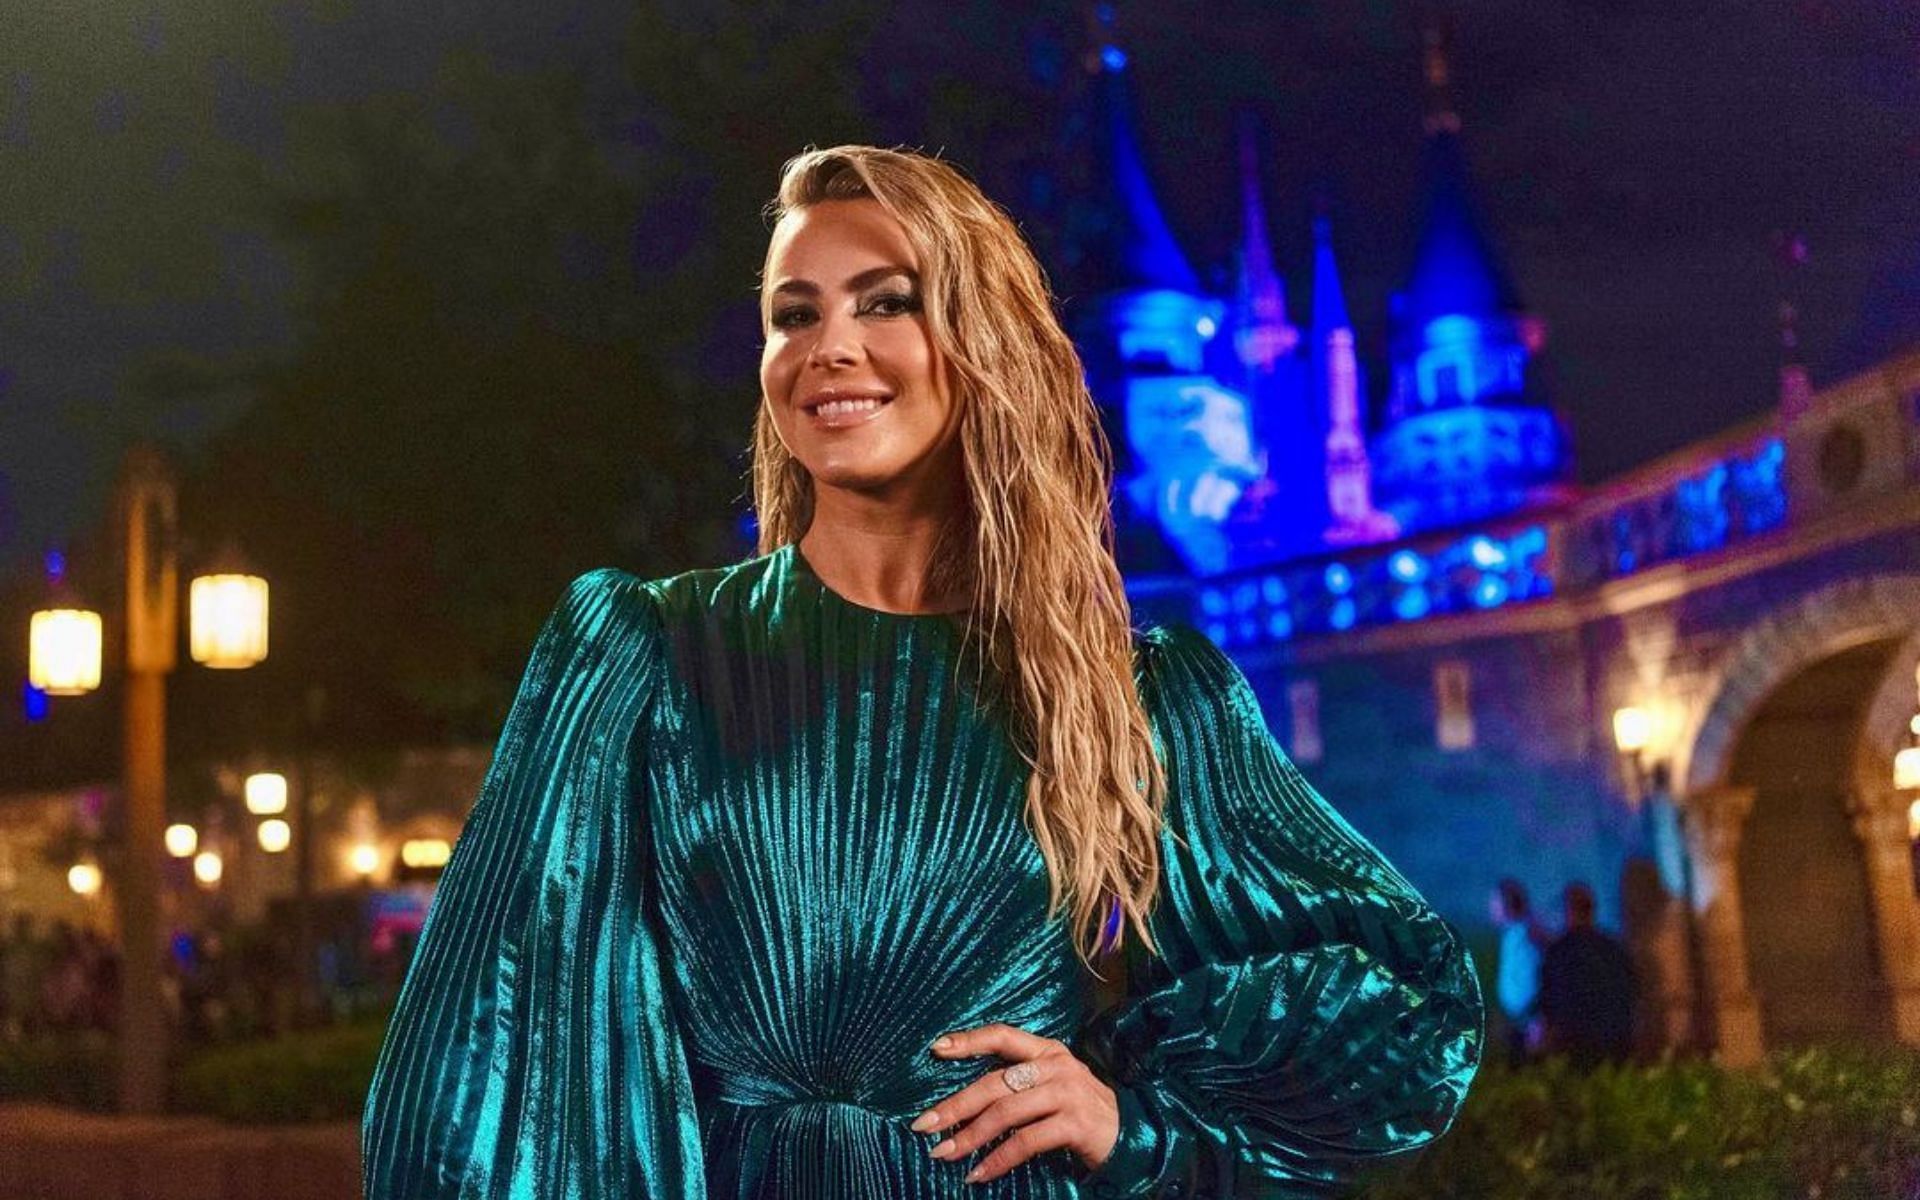 &lsquo;Disney Parks Magical Christmas Day Parade&rsquo; co-host Julianne Hough (Image via juleshough/ Instagram)